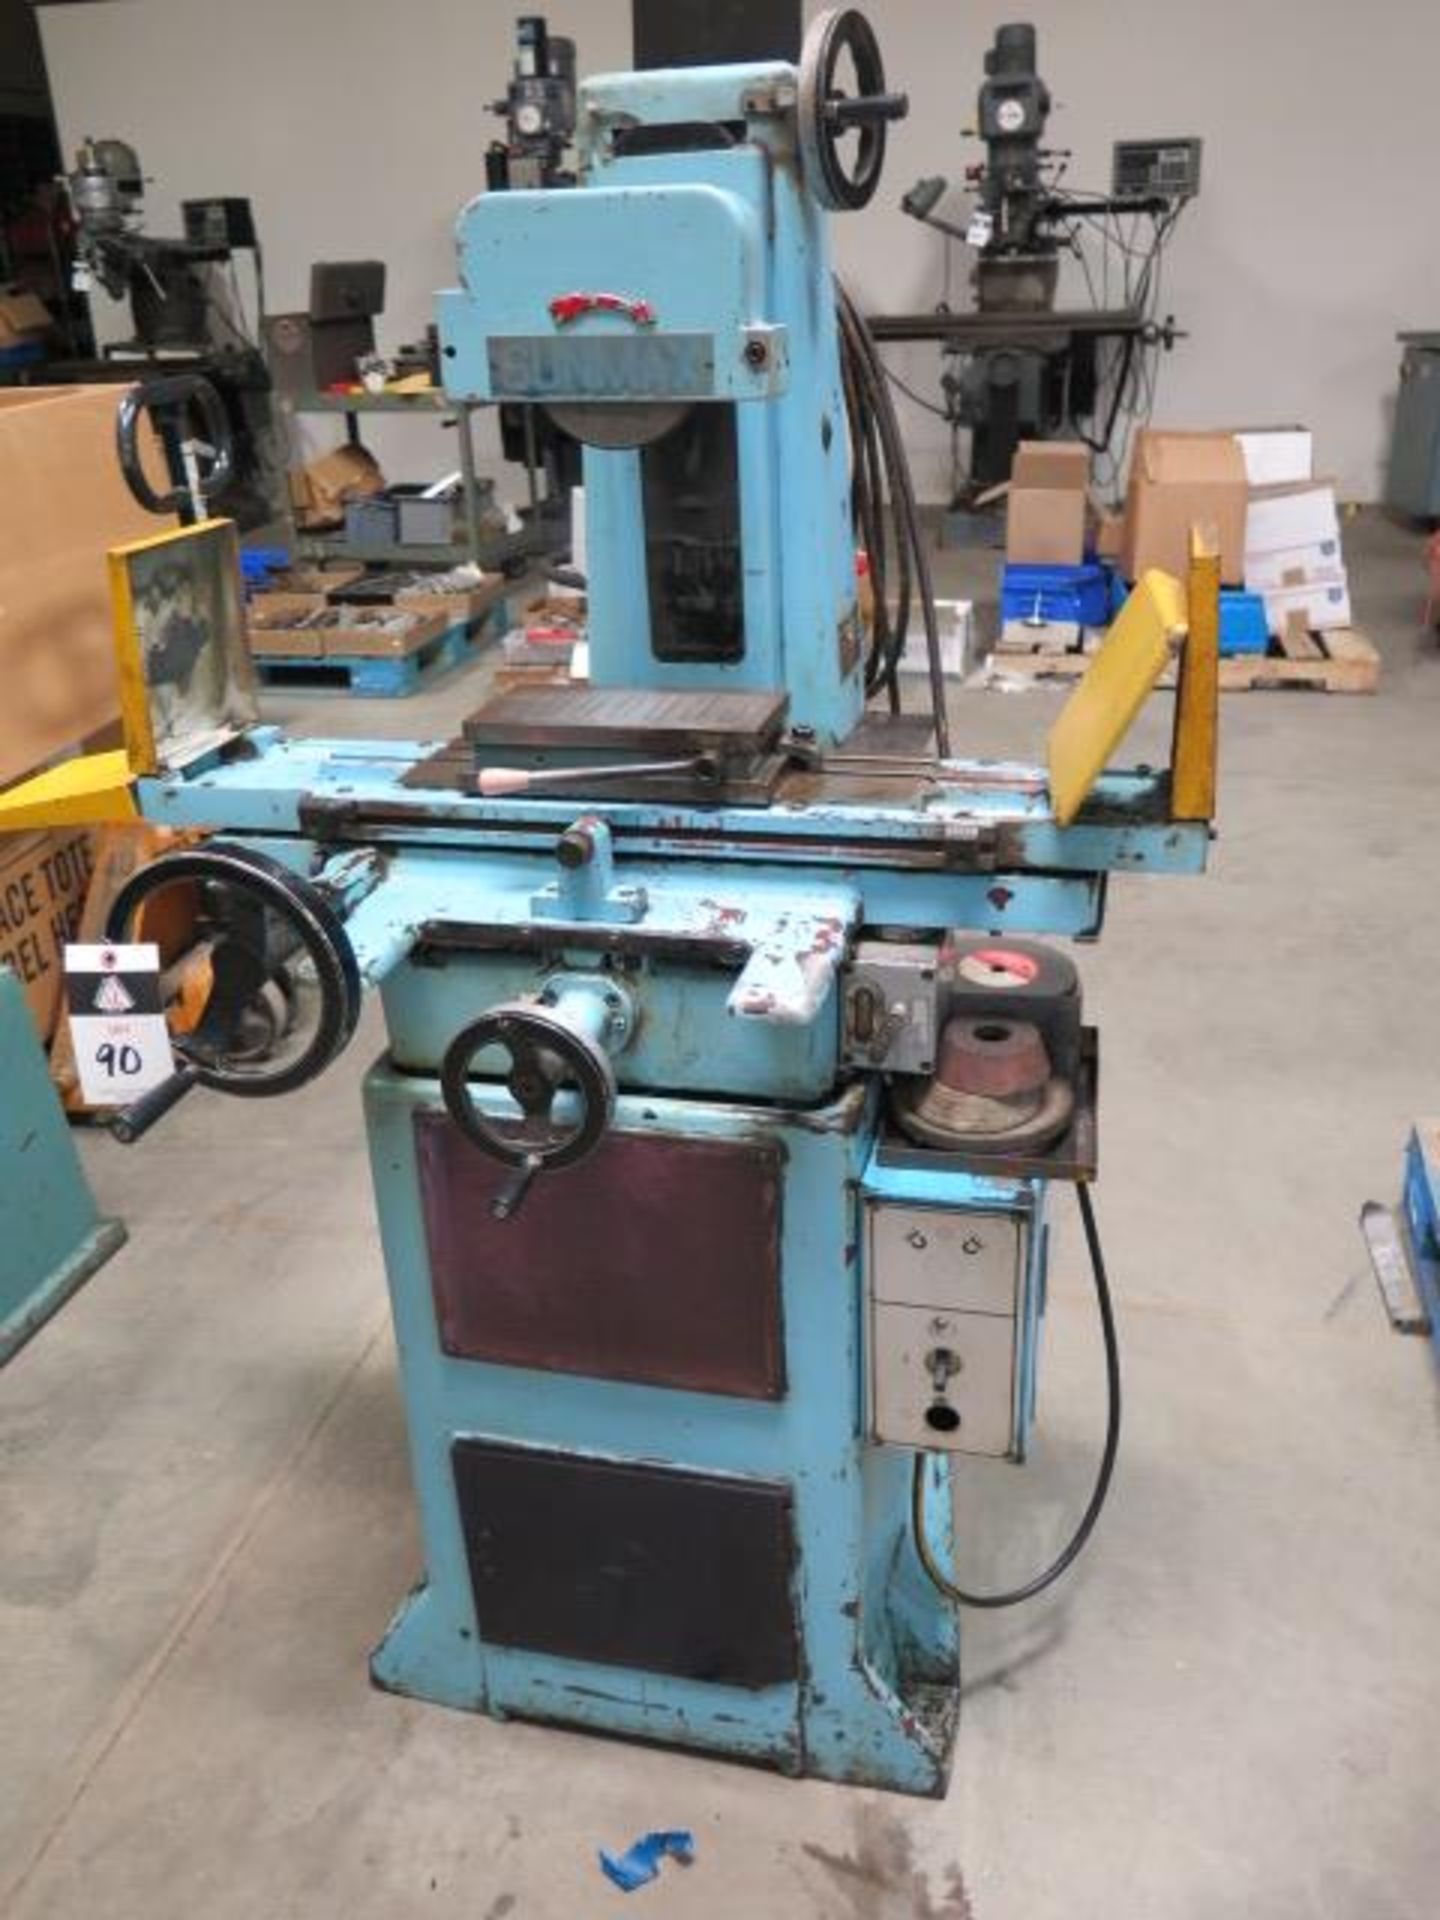 Sunmax 6" x 18" Surface Grinder w/ 5" x 10" Magnetic Chuck (SOLD AS-IS - NO WARRANTY)